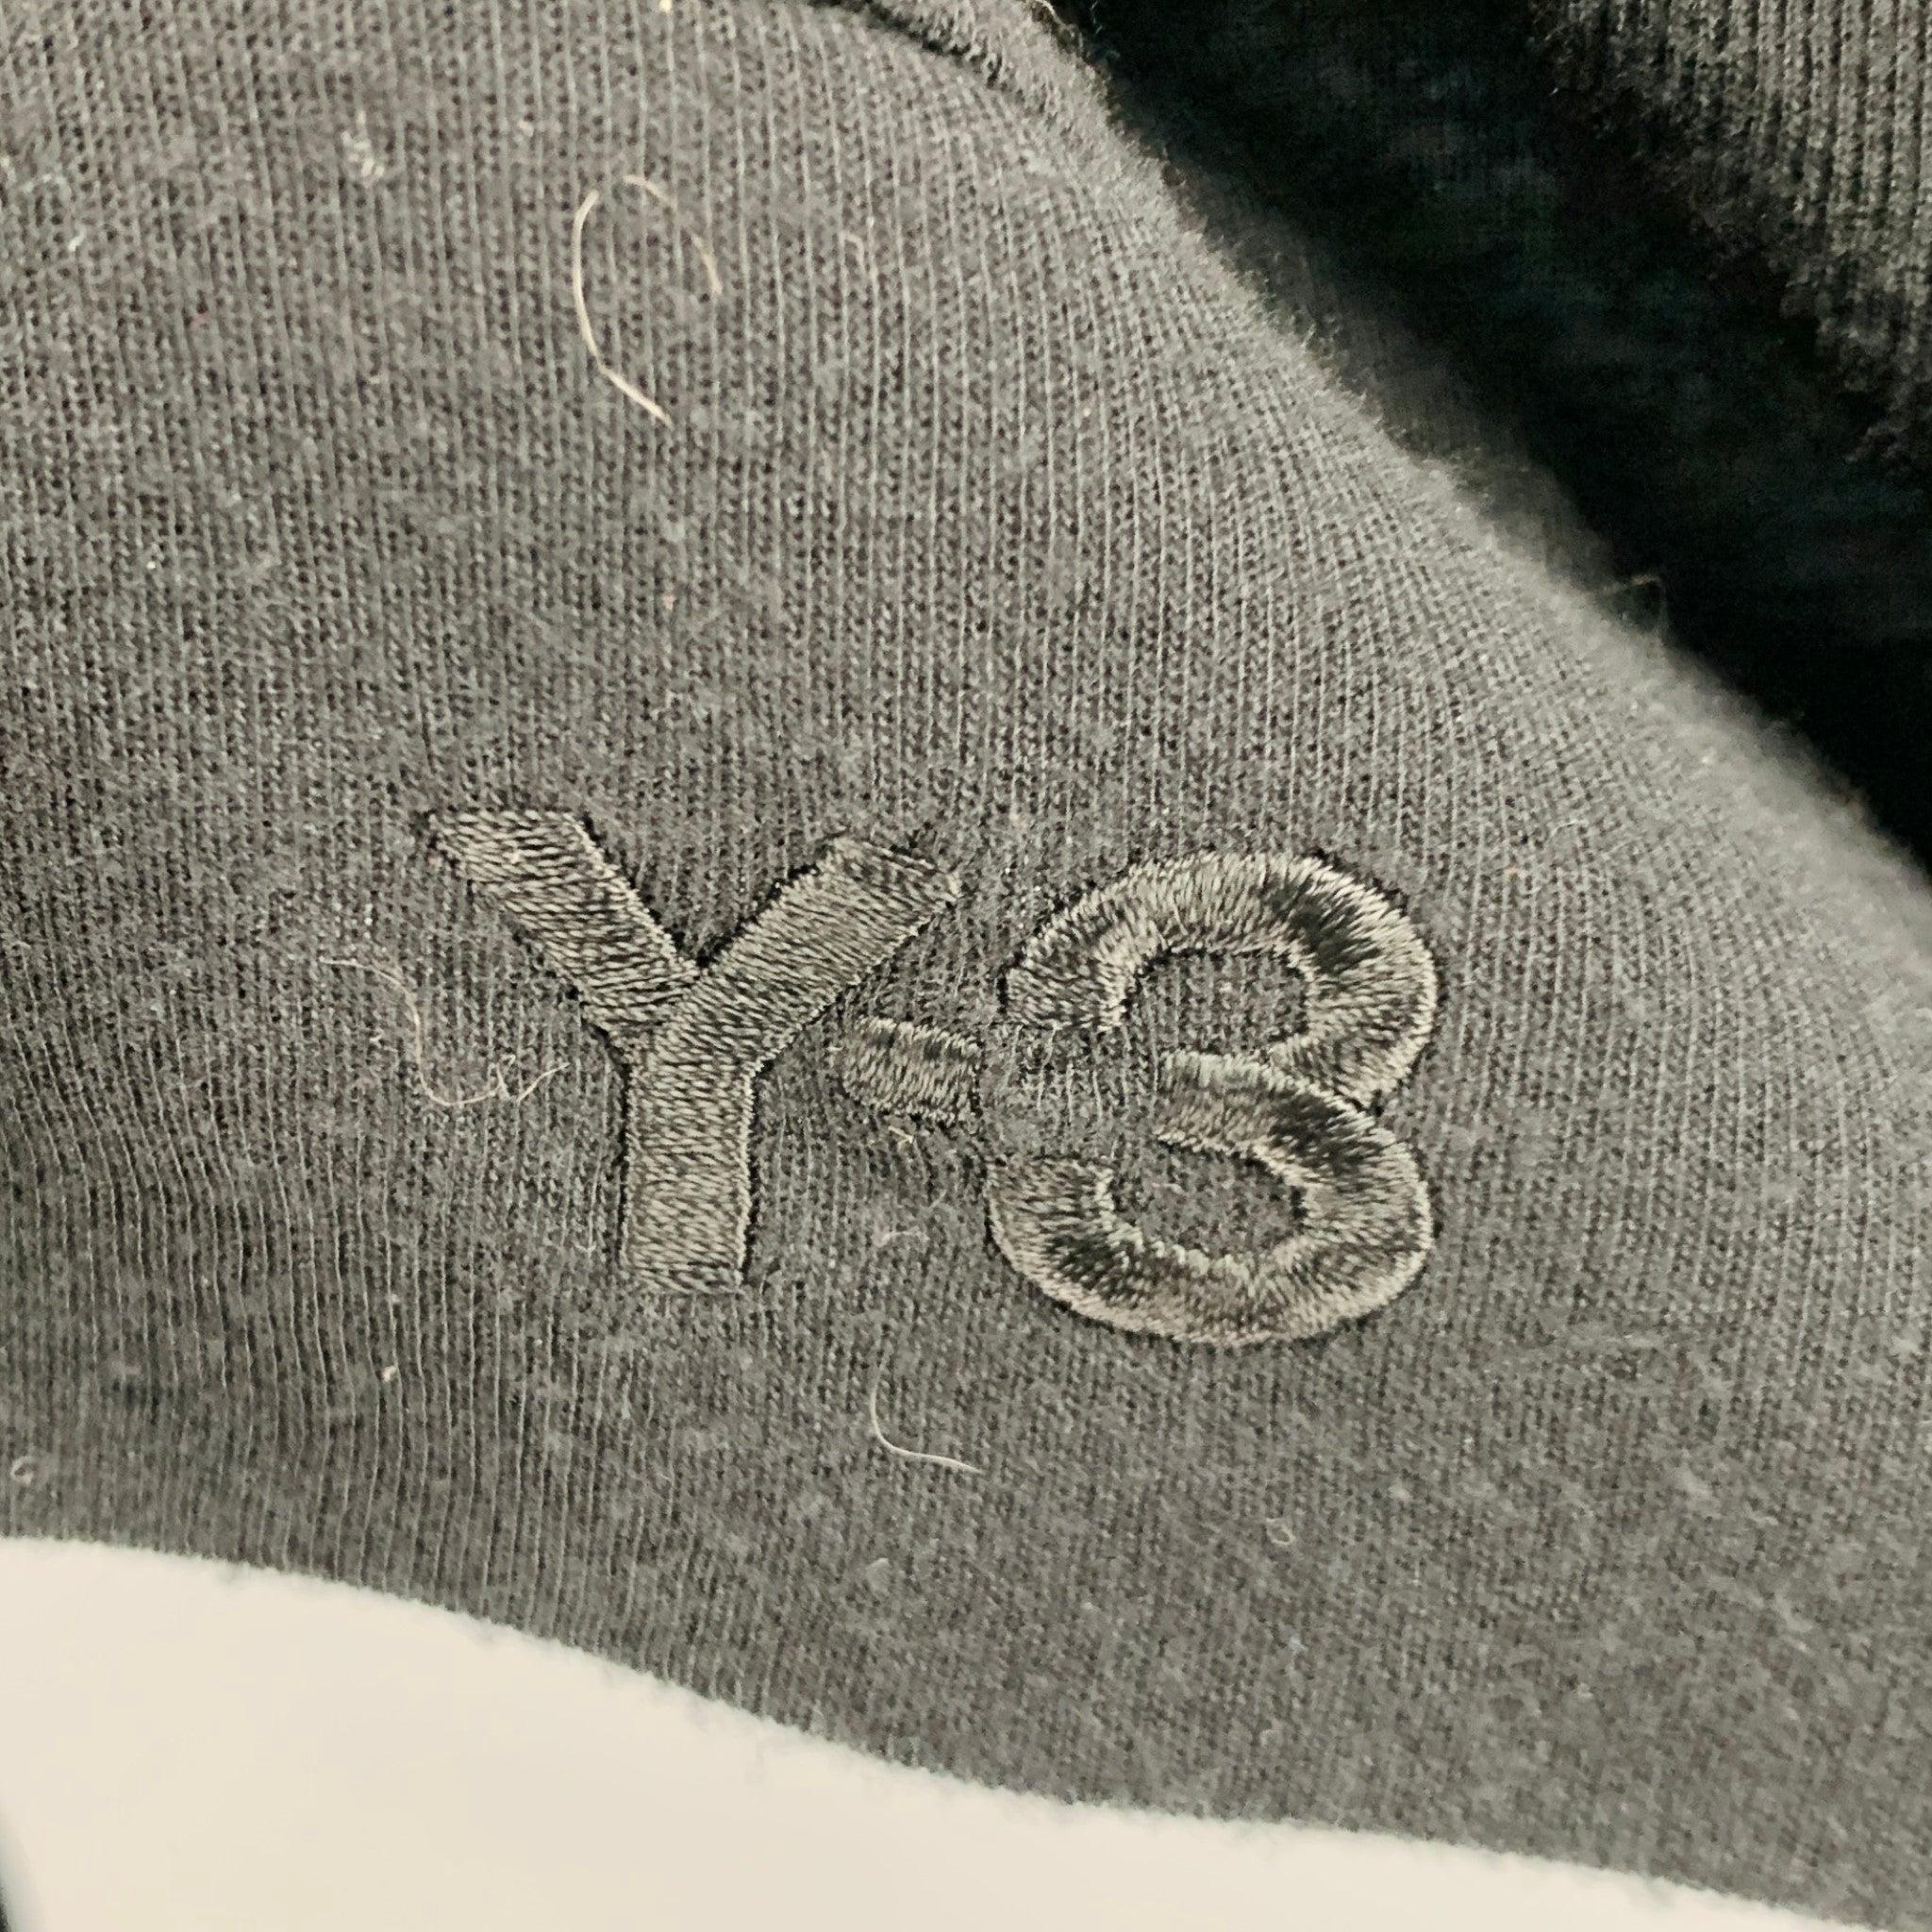 Y-3 cardigan
in a
black polyester viscose blend fabric featuring a drapey style, V-neck, and hidden button closure.Very Good Pre-Owned Condition. Moderate signs of wear. 

Marked:   M 

Measurements: 
 
Shoulder: 19.5 inches Bust: 48 inches Sleeve: